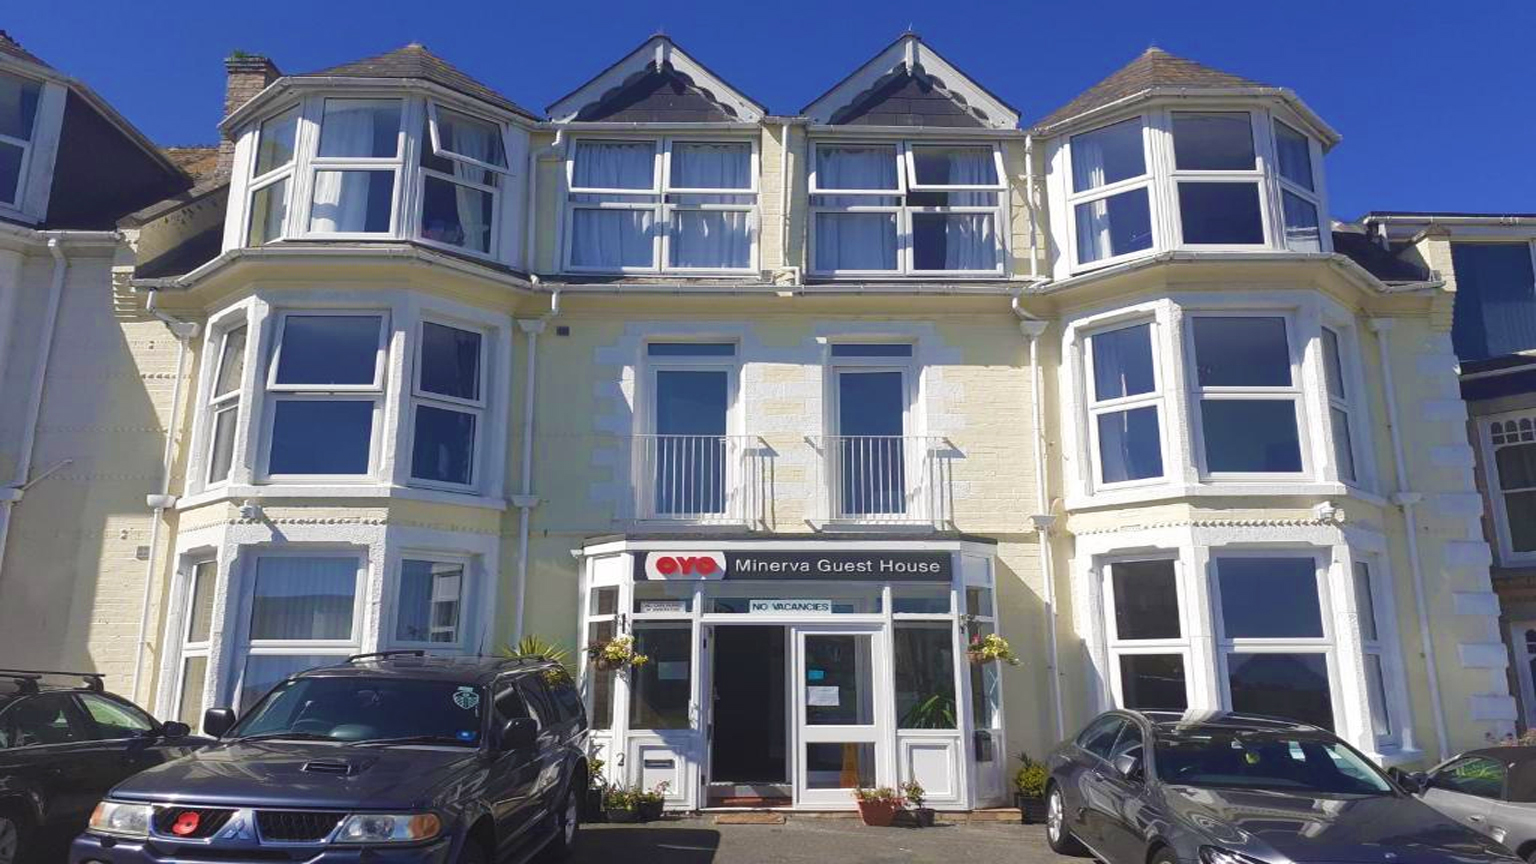 oyo-minerva-guesthouse-in-newquay